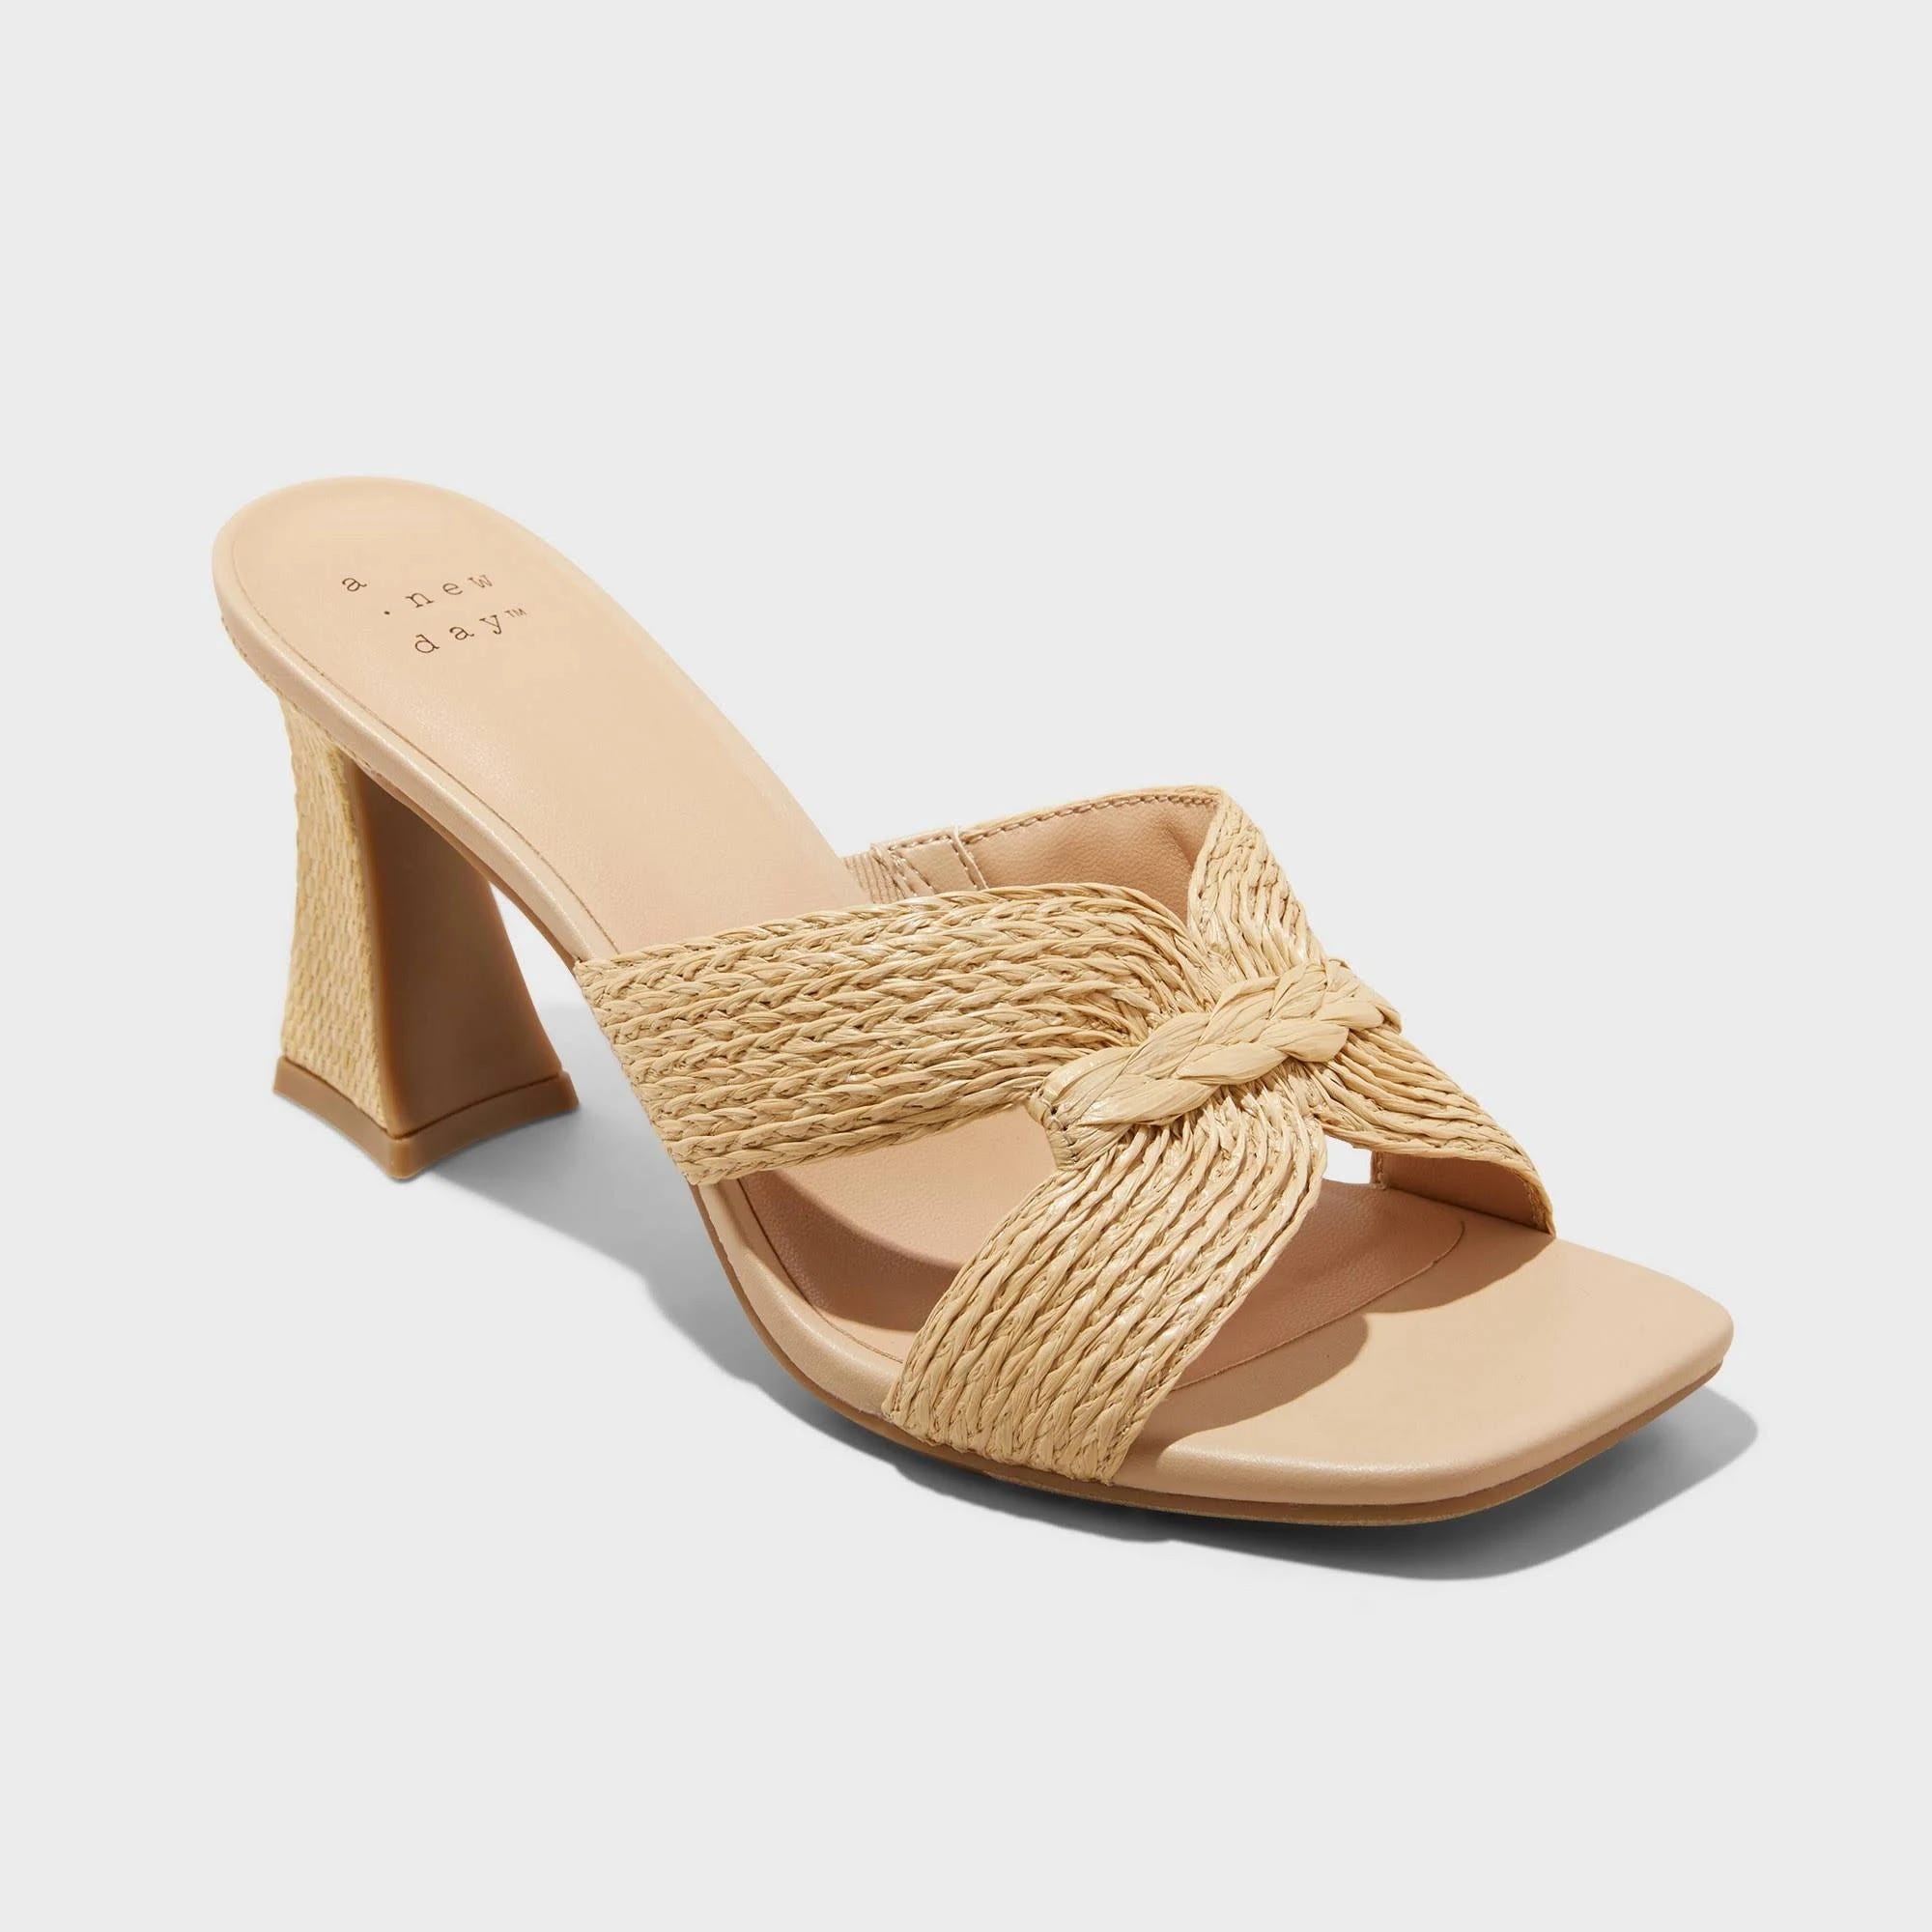 Chic Beige Tia Mule Heels by A New Day | Image